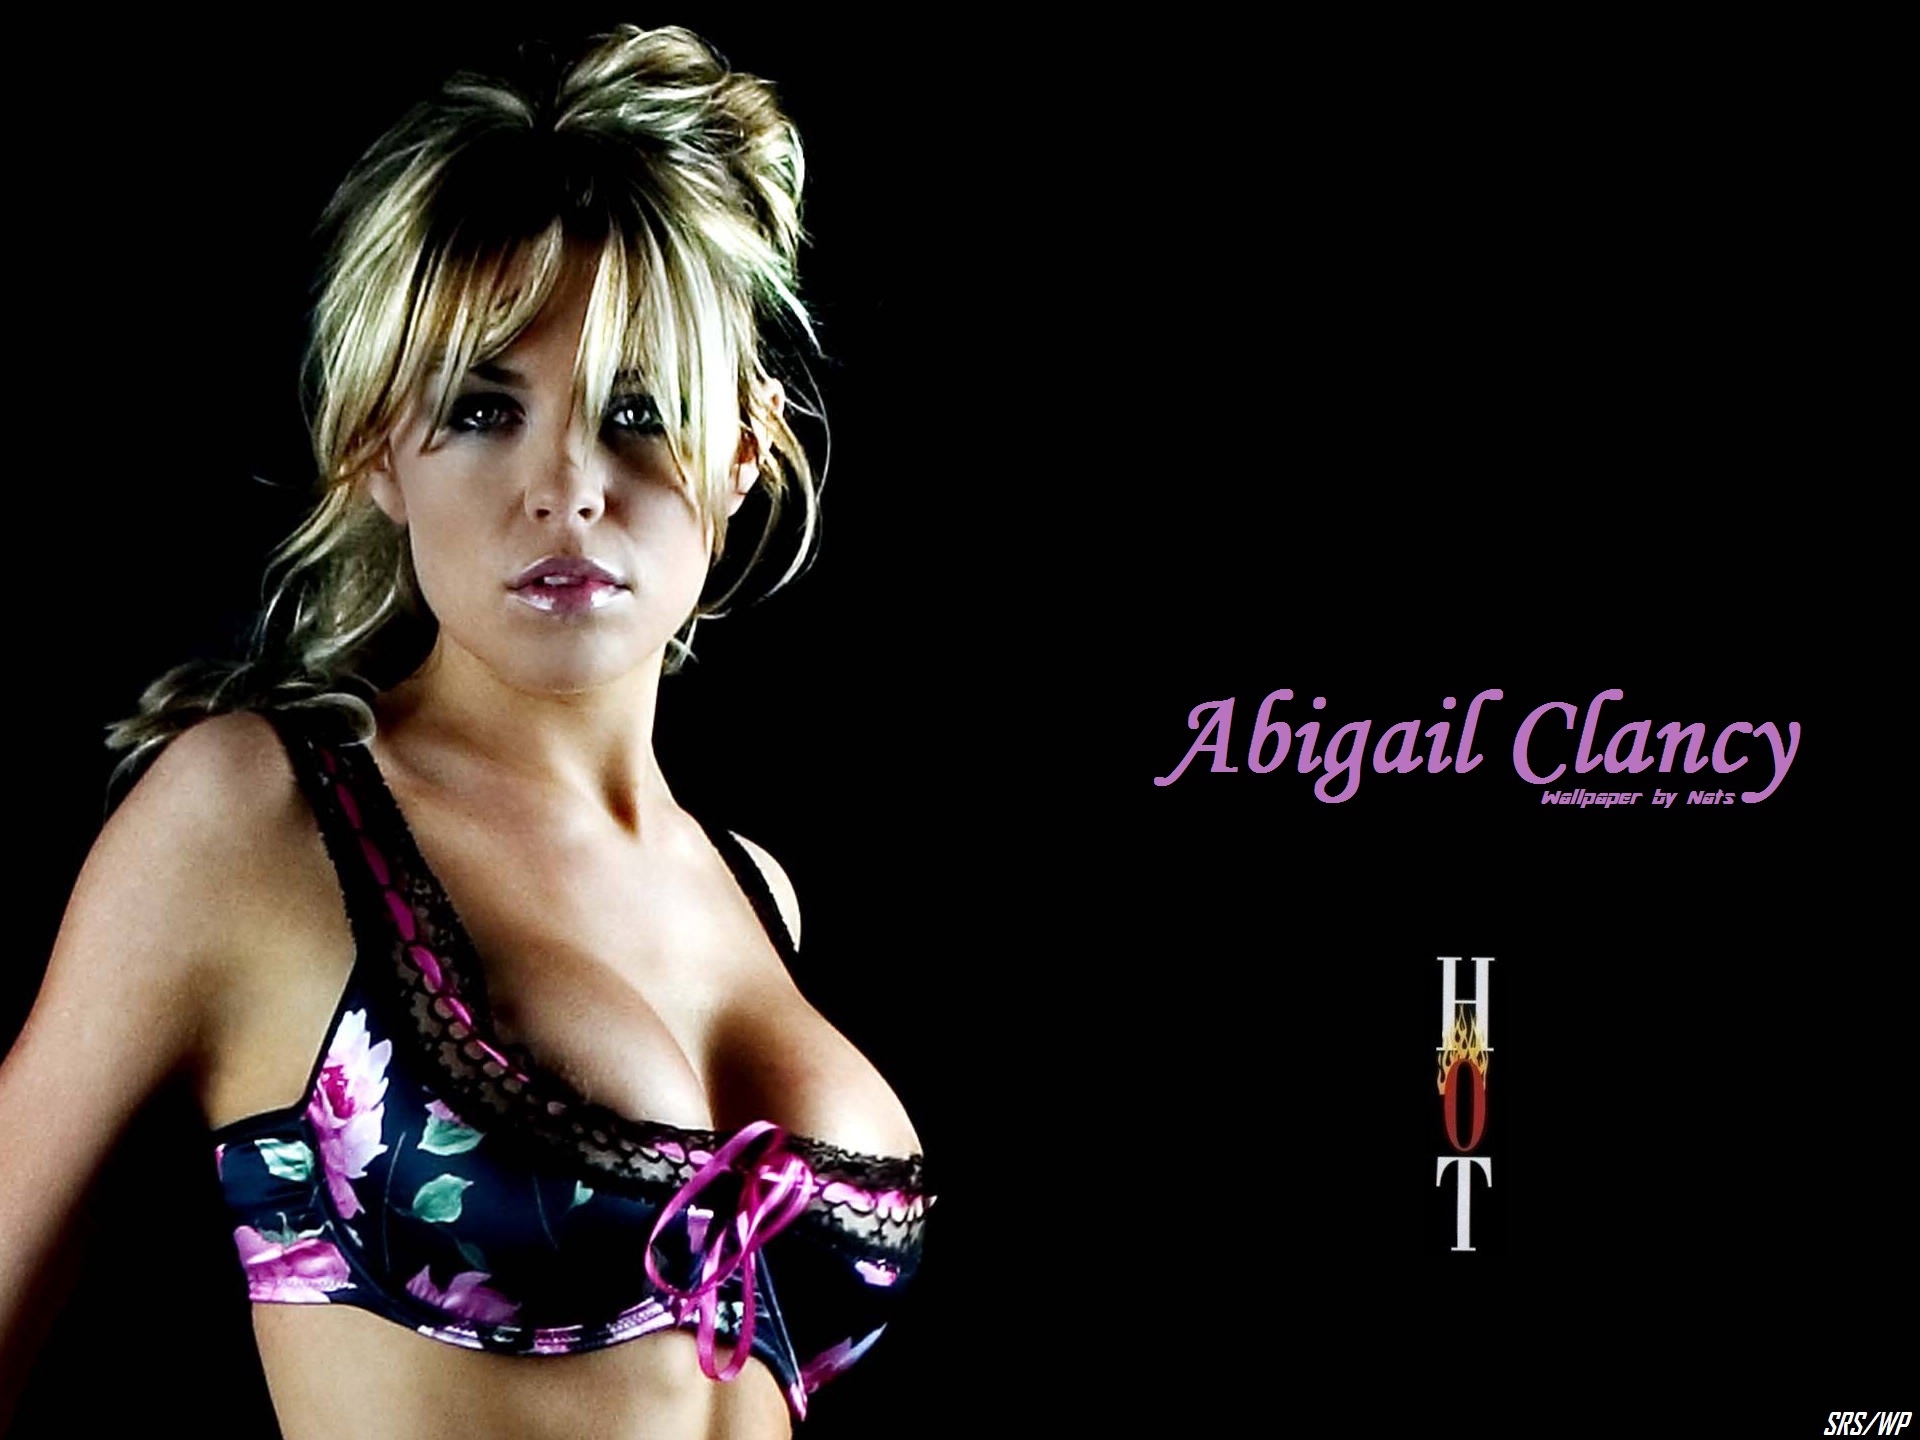 Download High quality Abigail Clancy wallpaper / Celebrities Female / 1920x1440